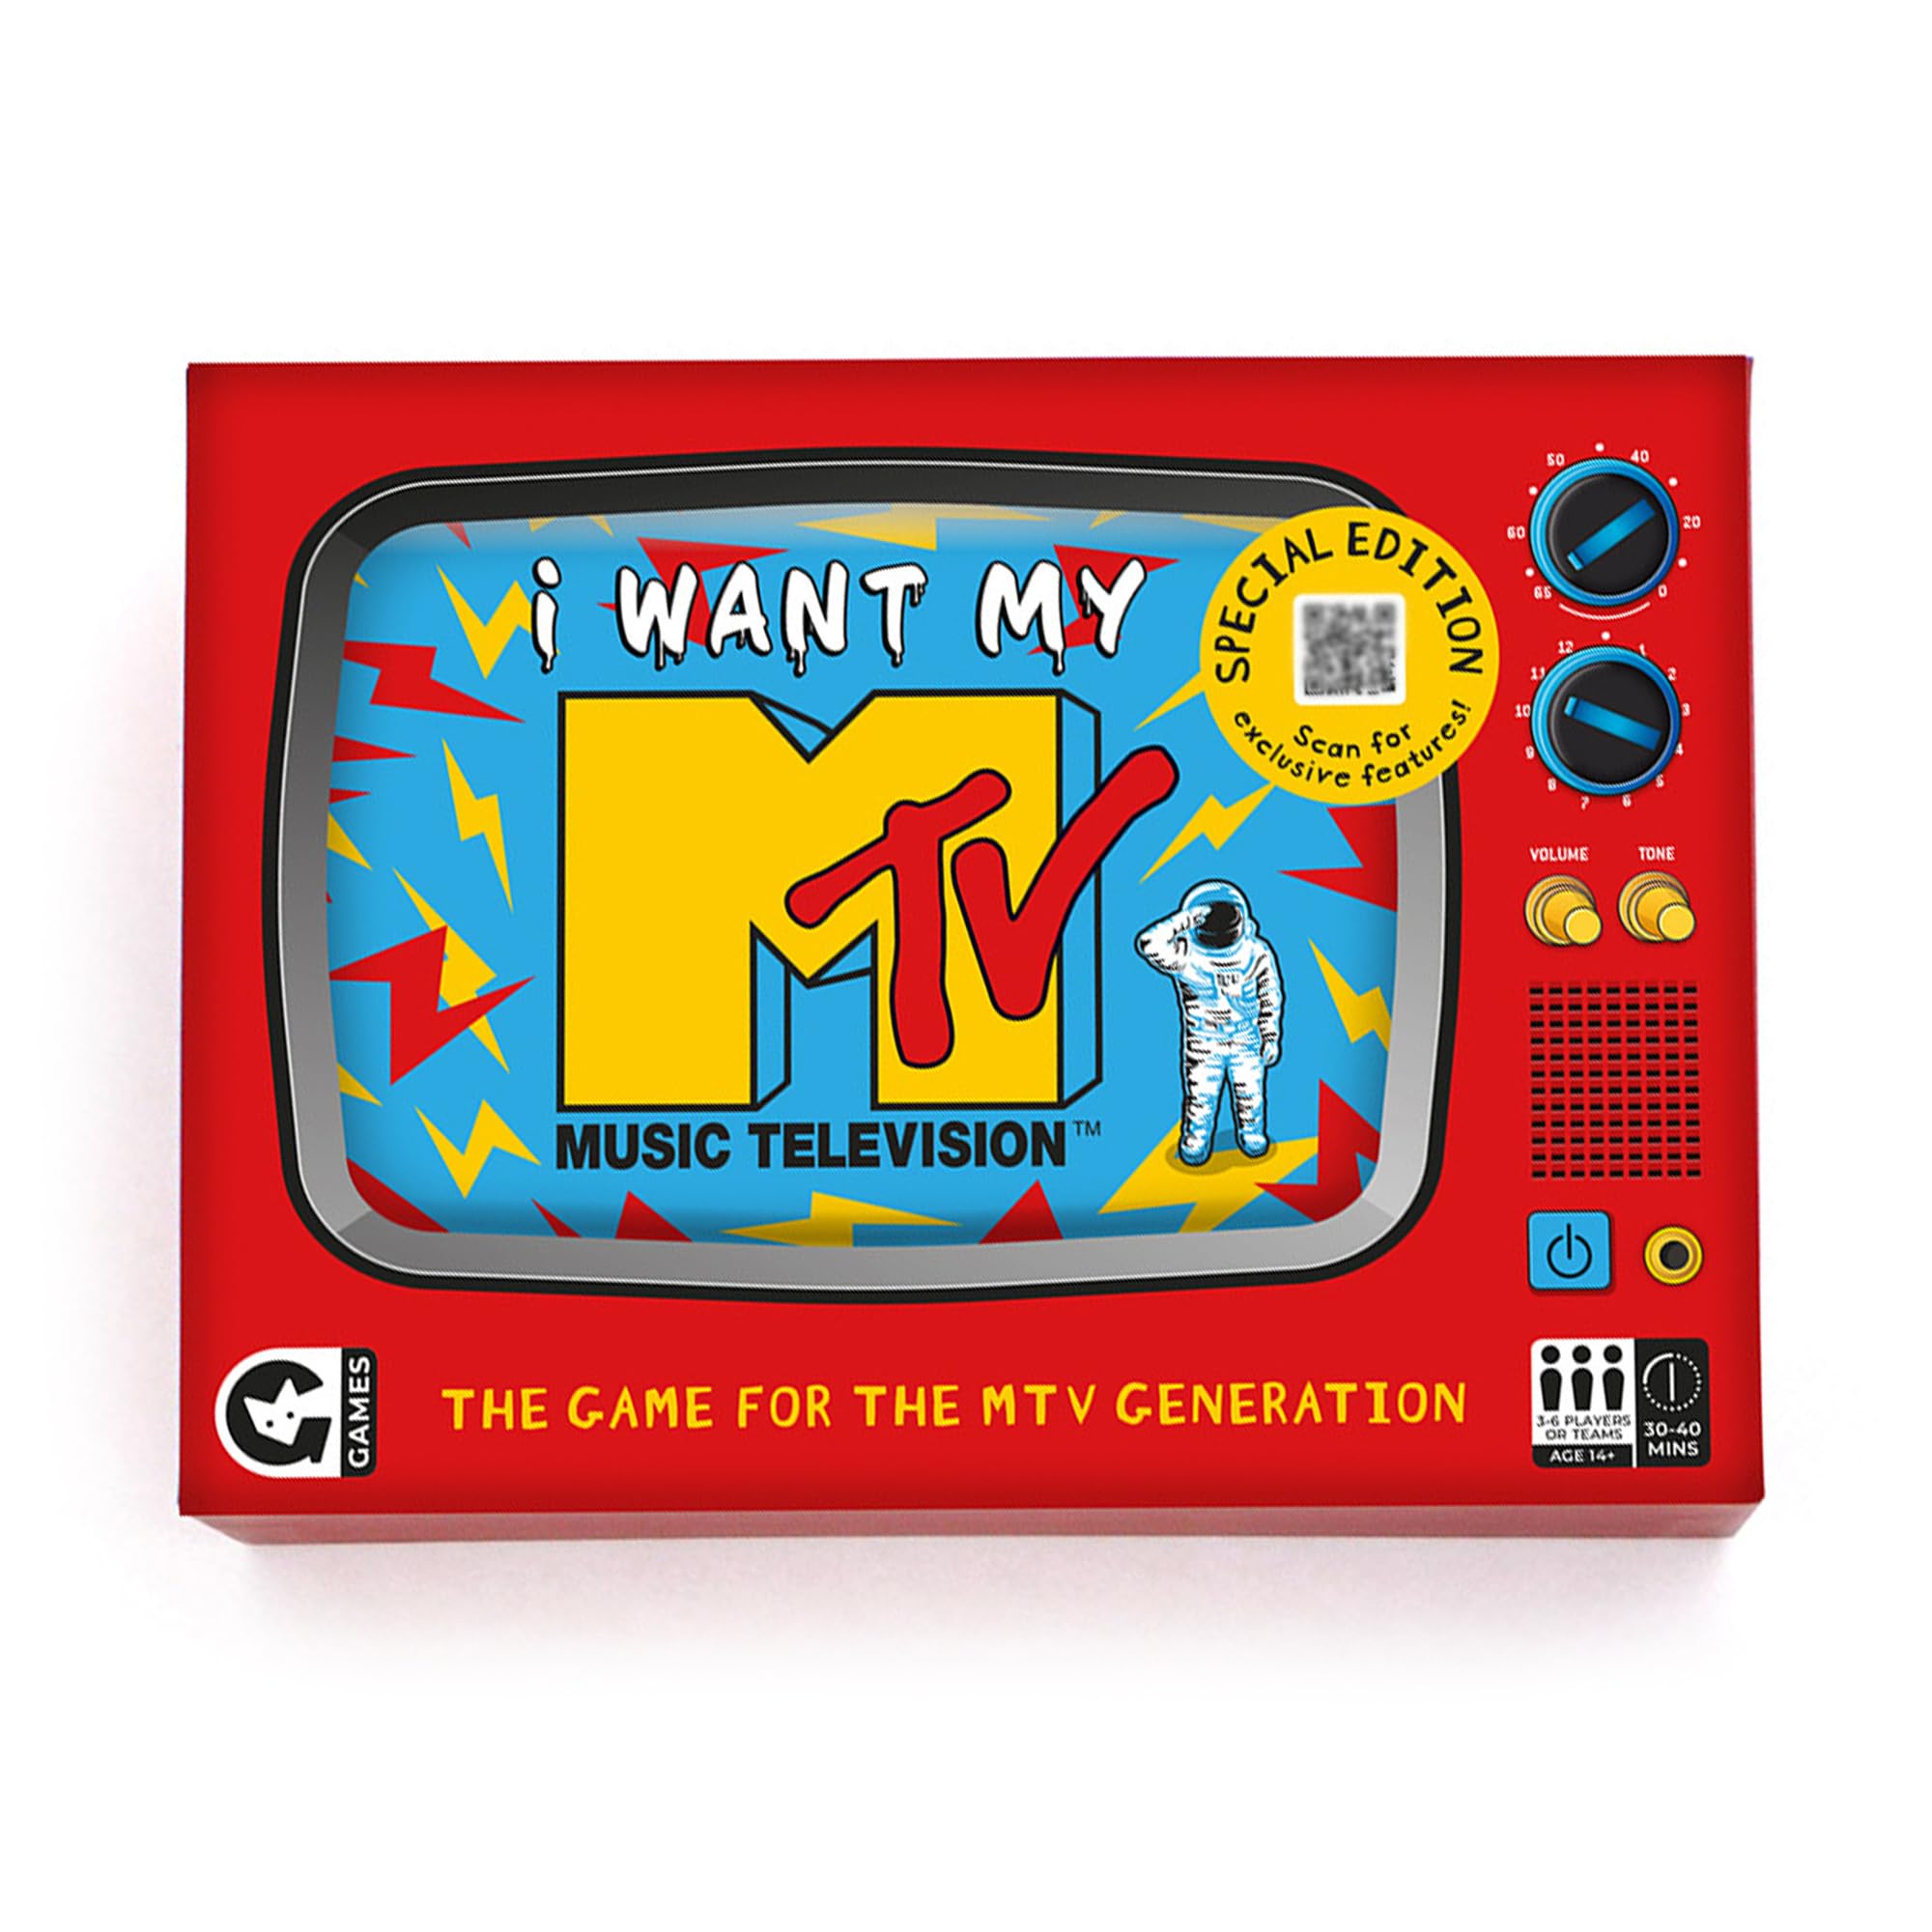 15 X GINGER FOX SPECIAL EDITION OFFICIAL I WANT MY MTV CARD GAME THE NOSTALGIC FOR GENERATION. ANSWER GENERAL KNOWLEDGE TRIVIA MUSIC QUESTIONS TO WIN., 0112.1215.71.OCL.EXL, MULTI-COLOURED: LOCATION